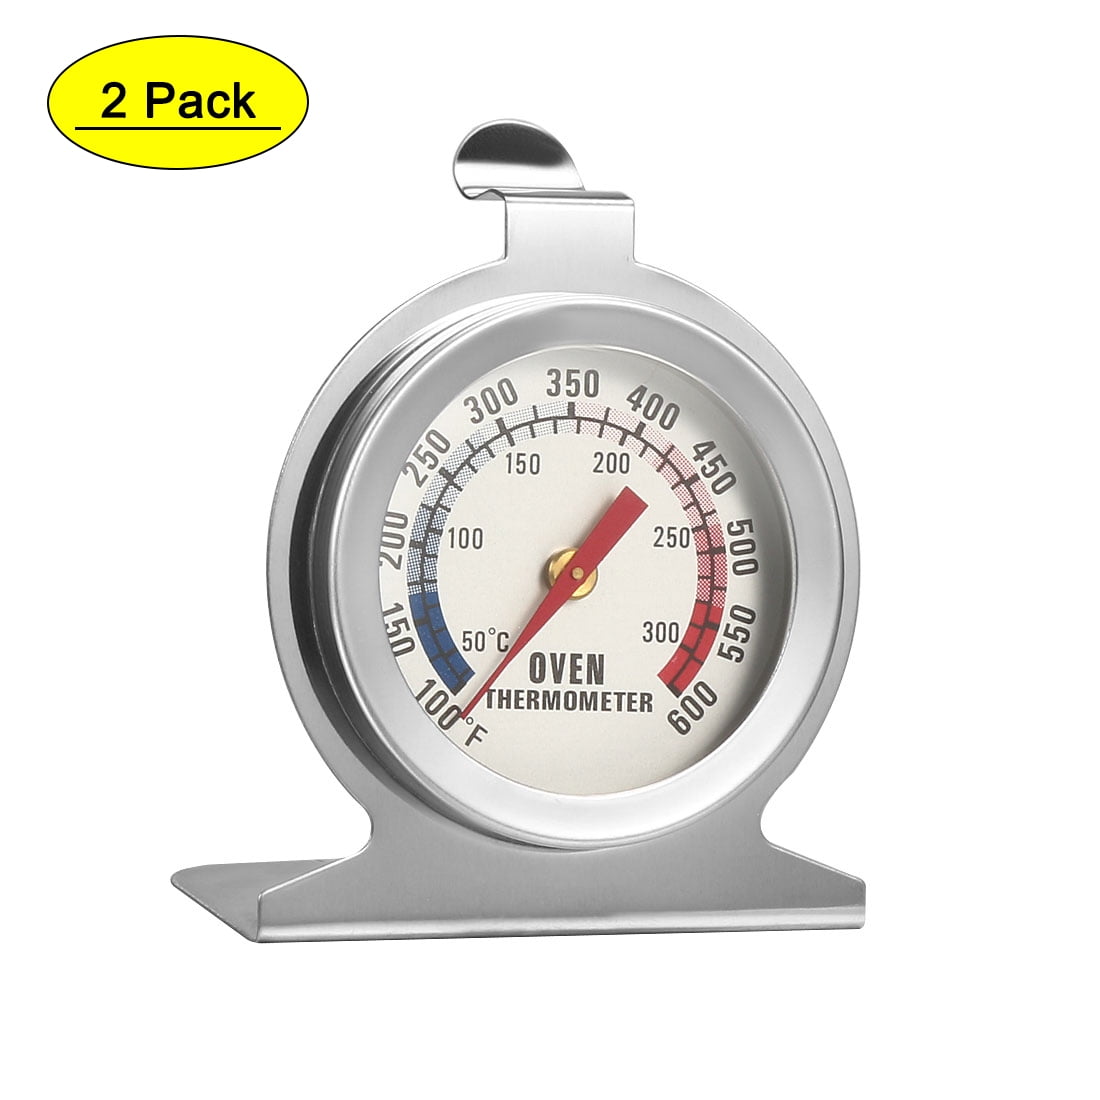 Taylor 6021 Classic 100F to 600F Stainless Grill Thermometer 